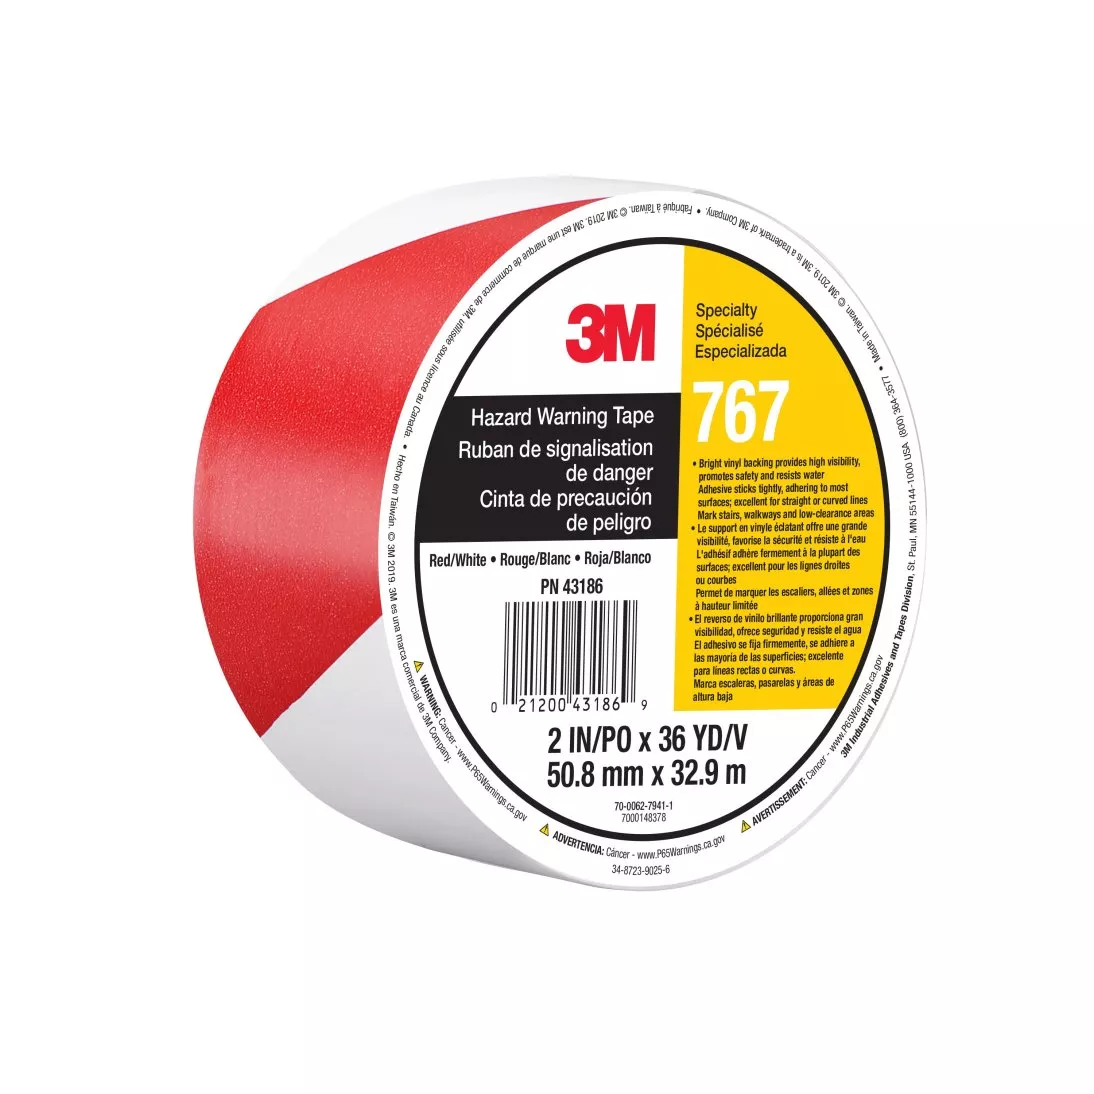 3M™ Safety Stripe Vinyl Tape 767, Red/White, 2 in x 36 yd, 5 mil, 24 Roll/Case, Individually Wrapped Conveniently Packaged